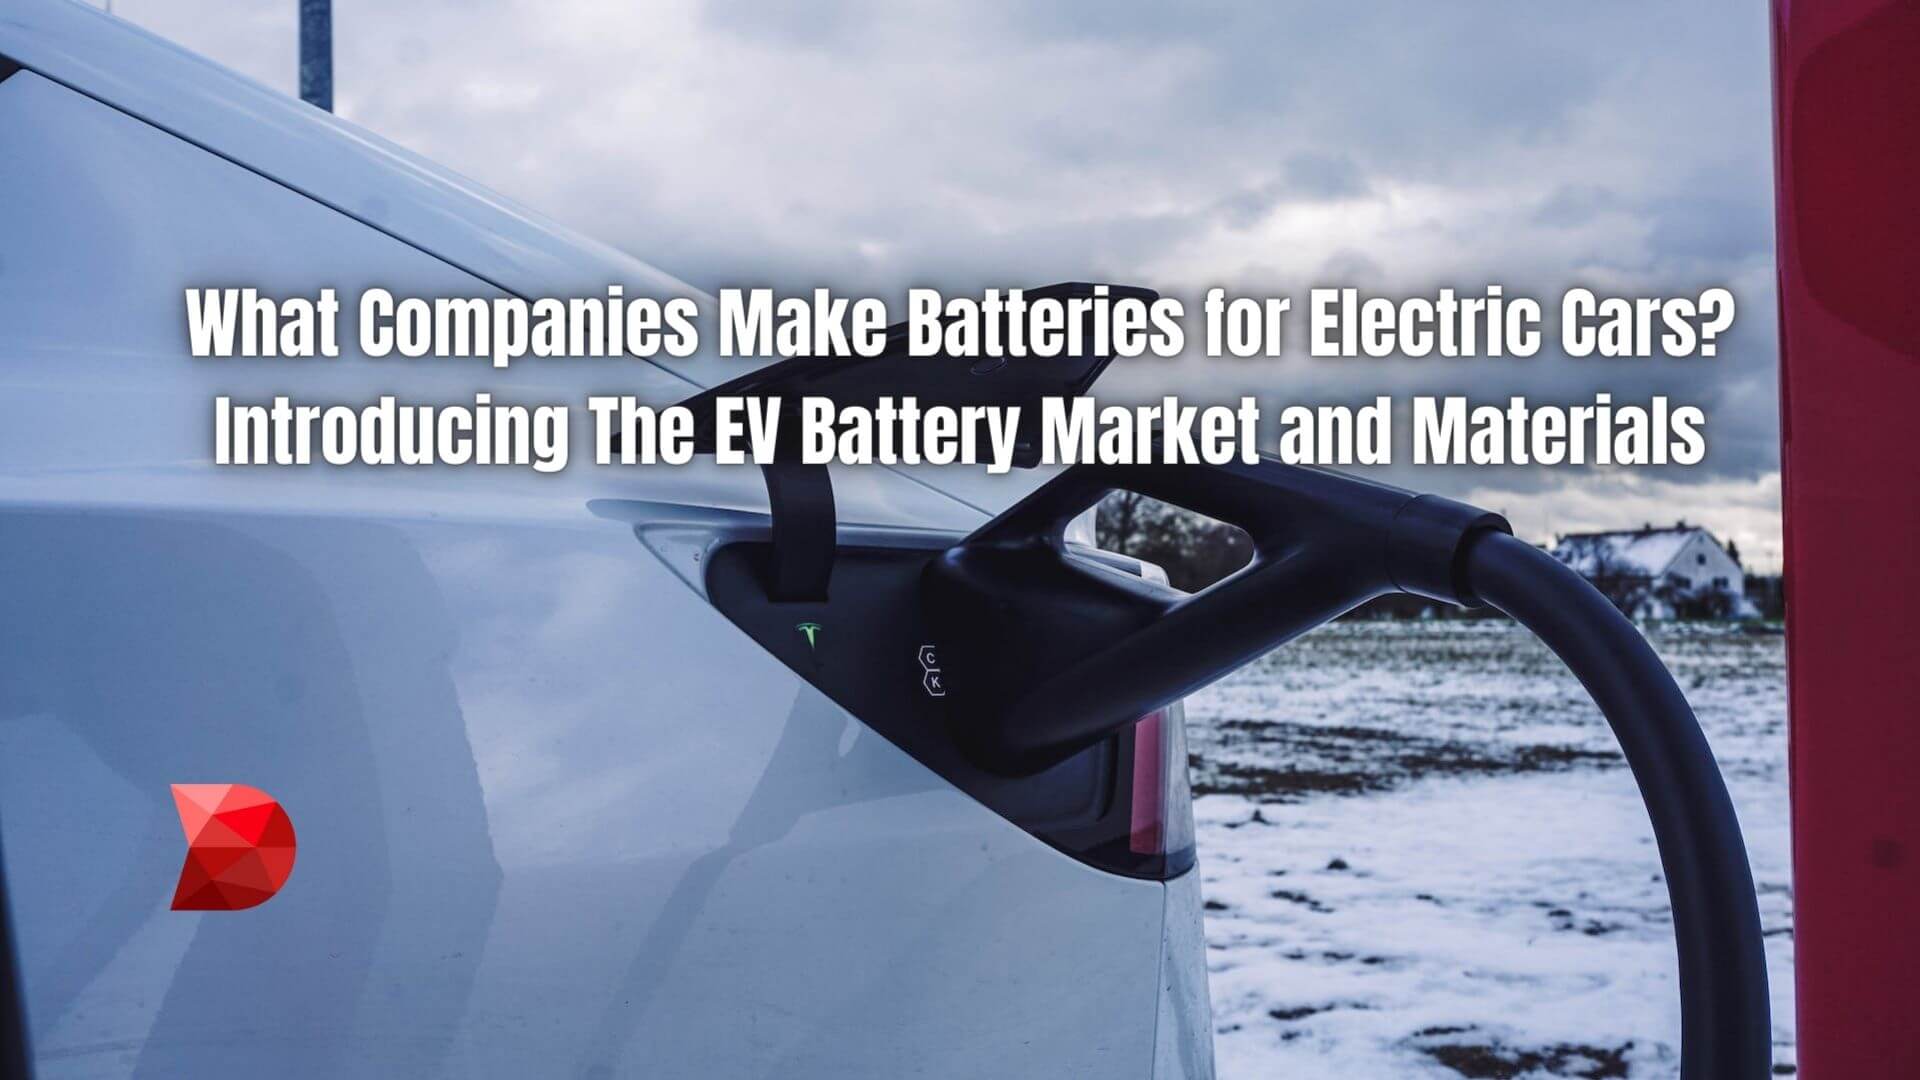 Explore the EV battery market now. Click here to learn more about the leading companies behind electric car battery production.